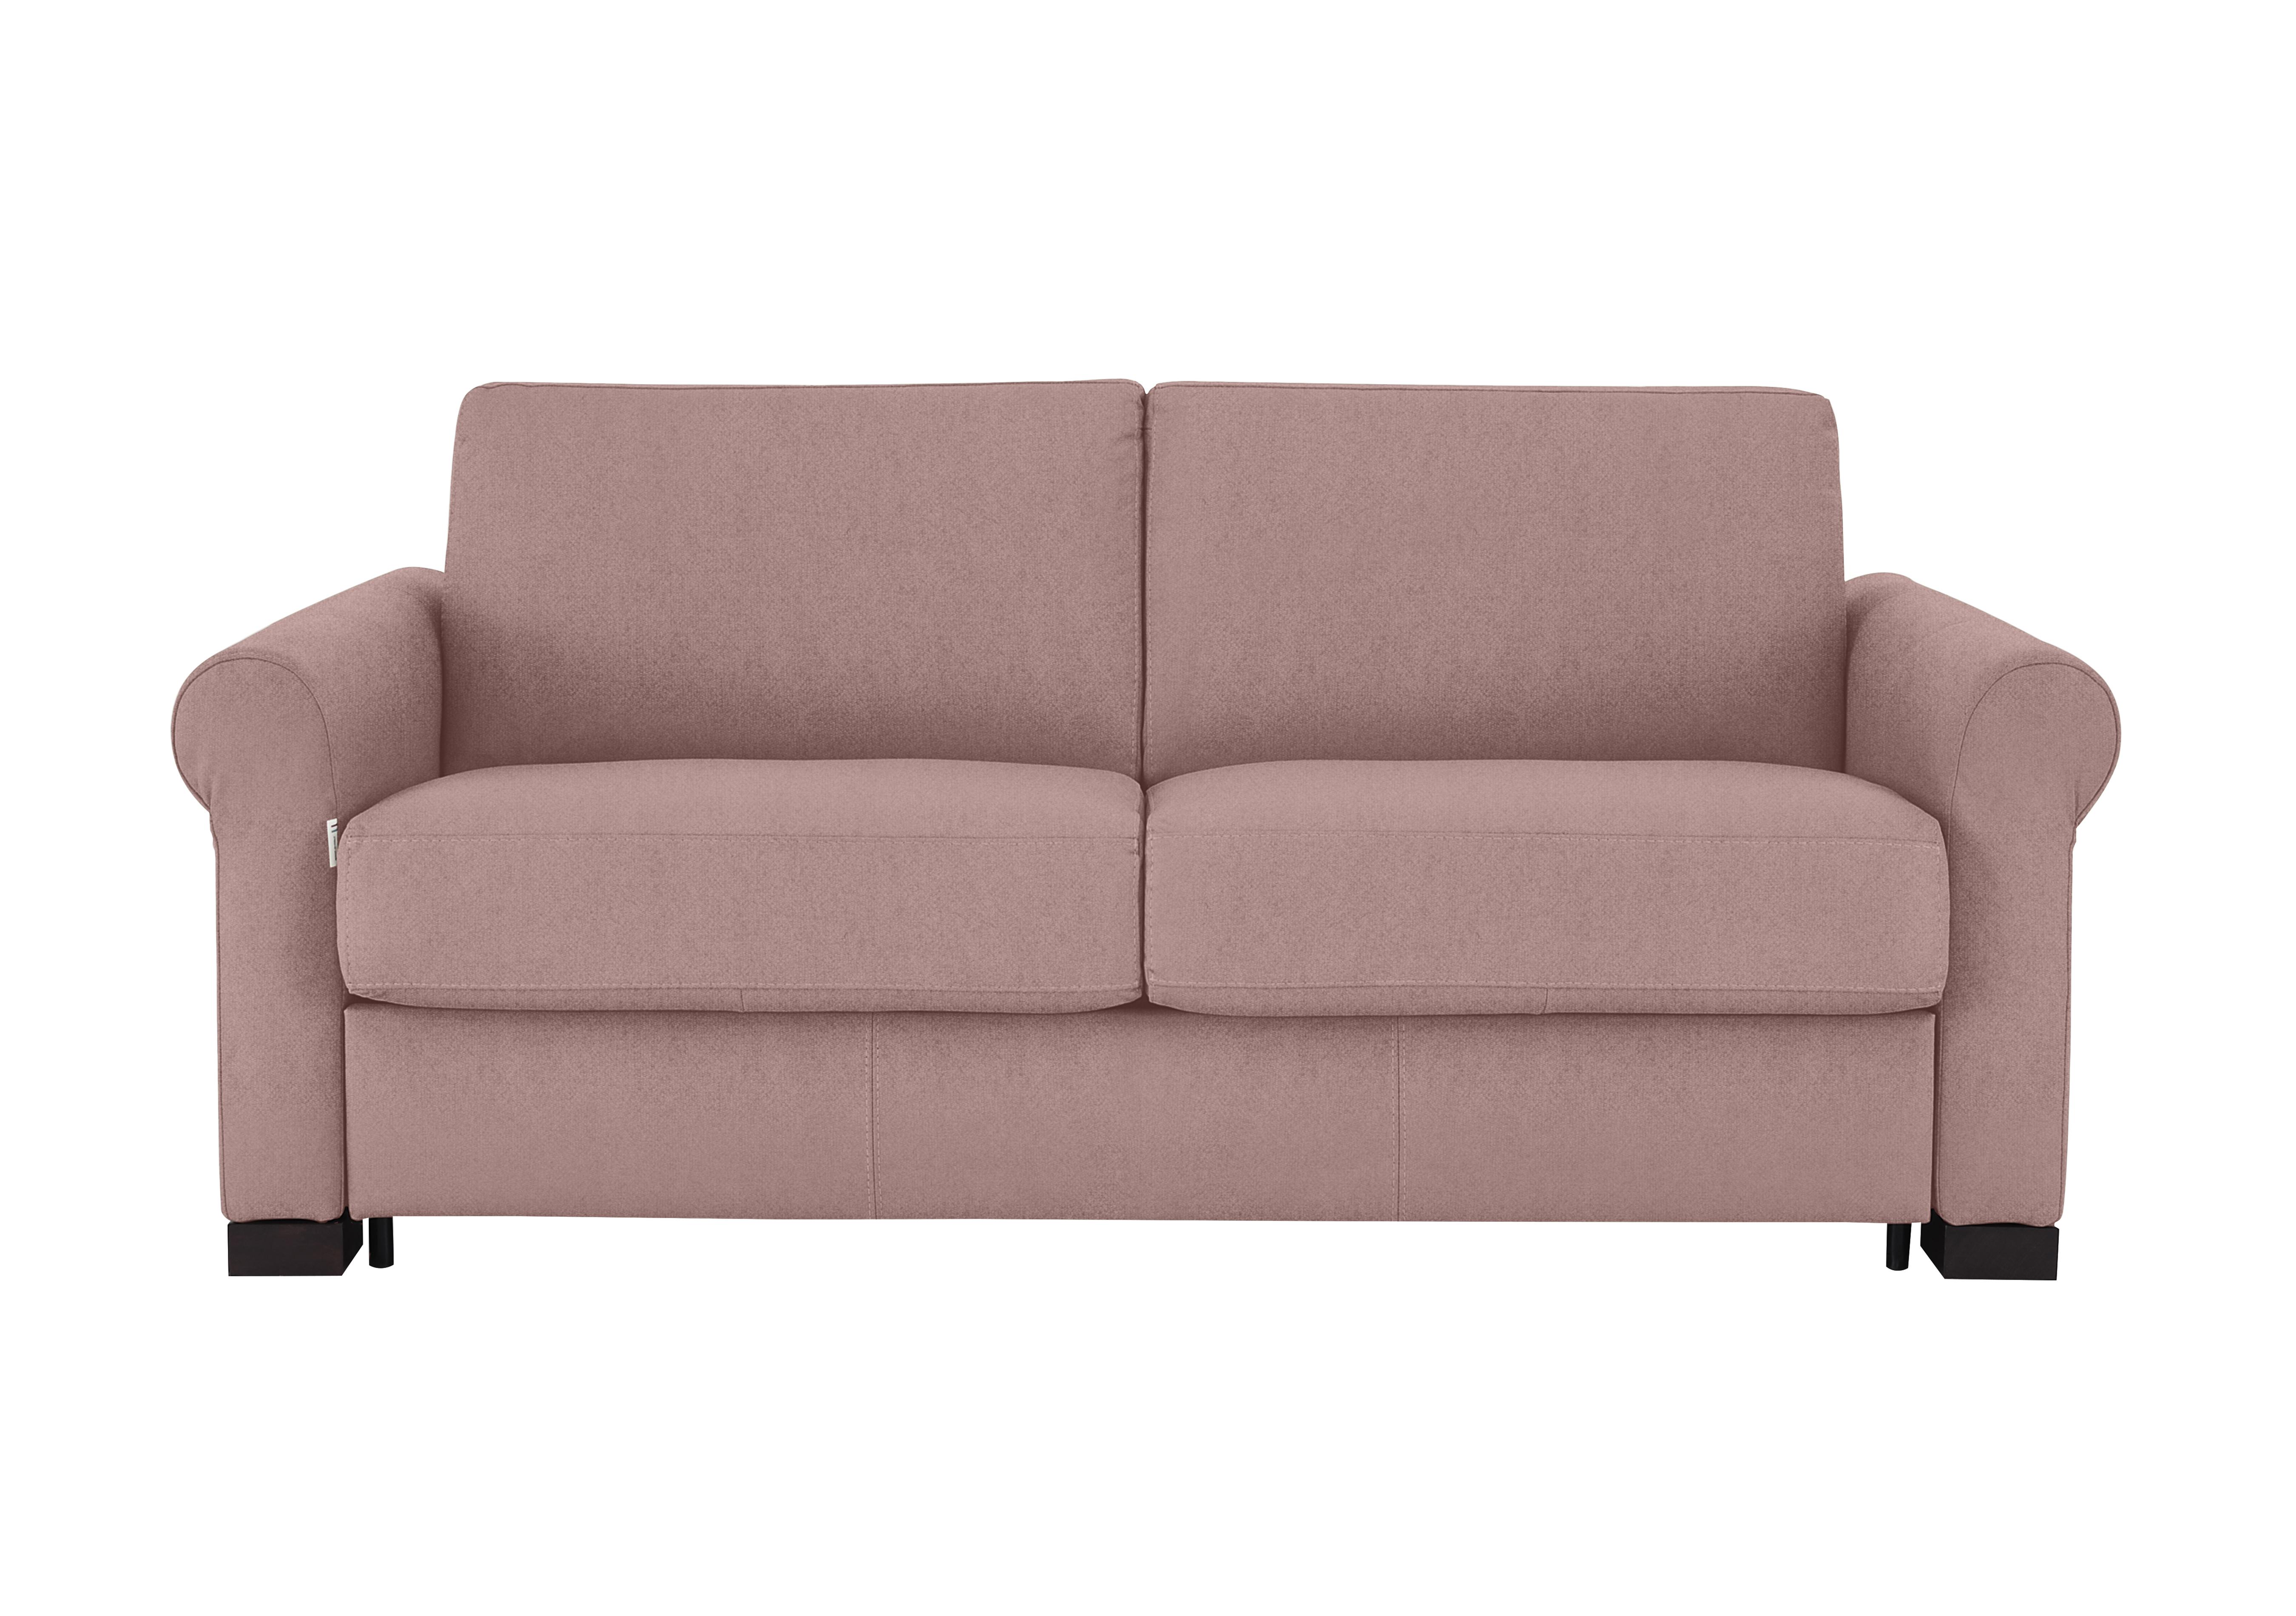 Alcova 2.5 Seater Fabric Sofa Bed with Scroll Arms in Fuente Coral on Furniture Village